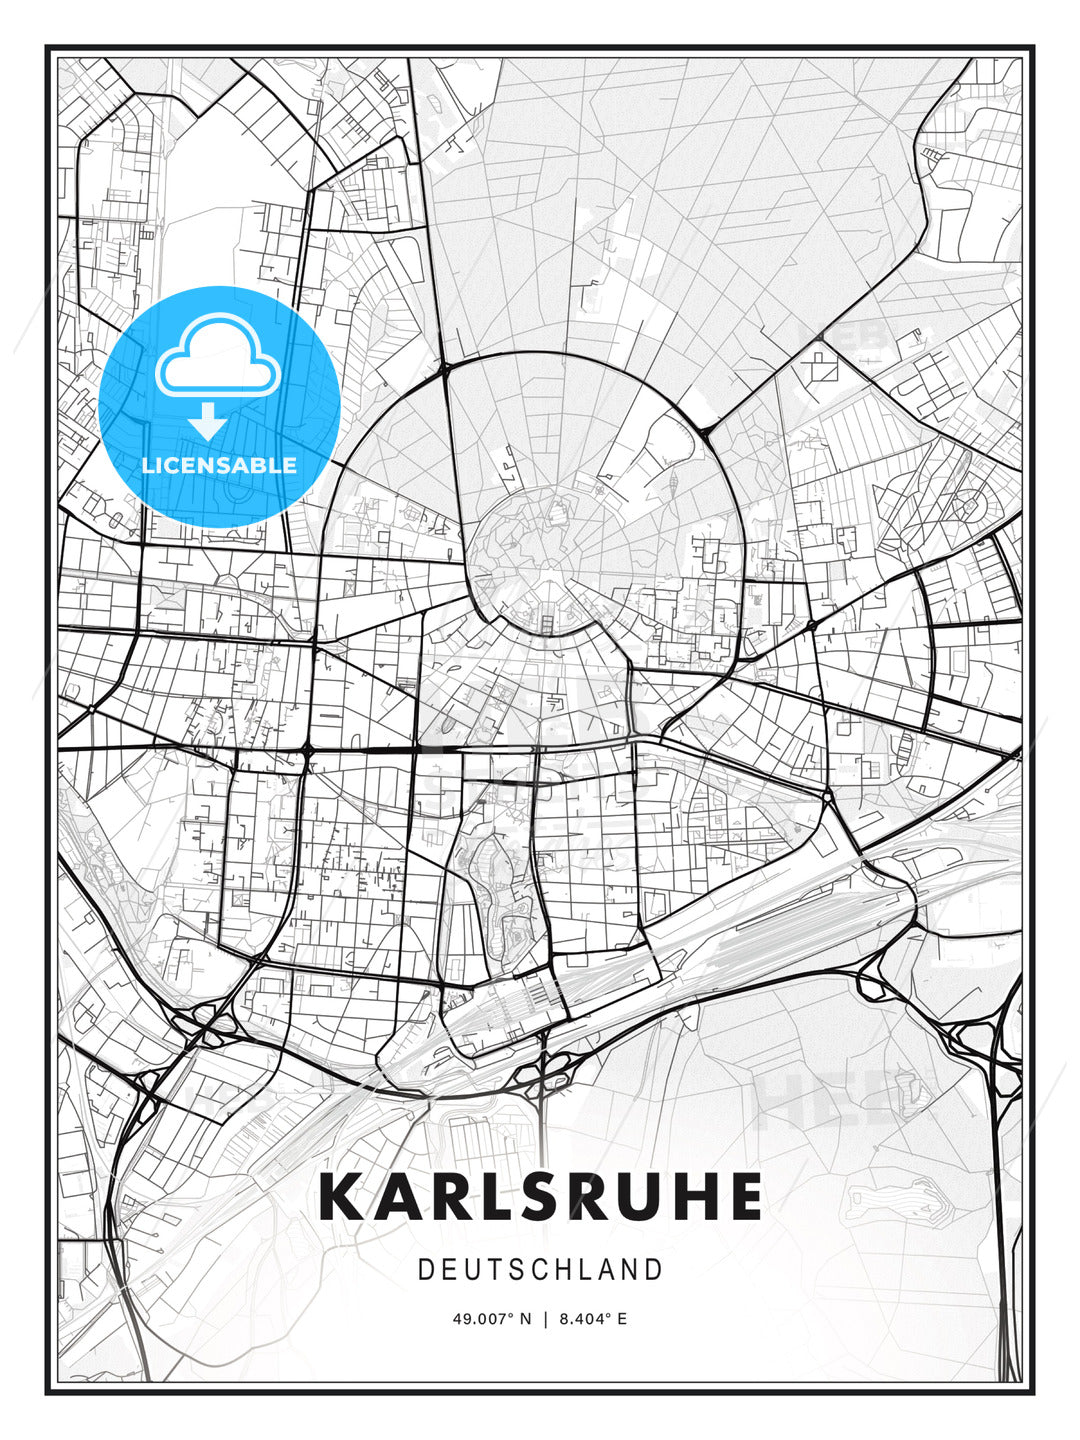 Karlsruhe, Germany, Modern Print Template in Various Formats - HEBSTREITS Sketches